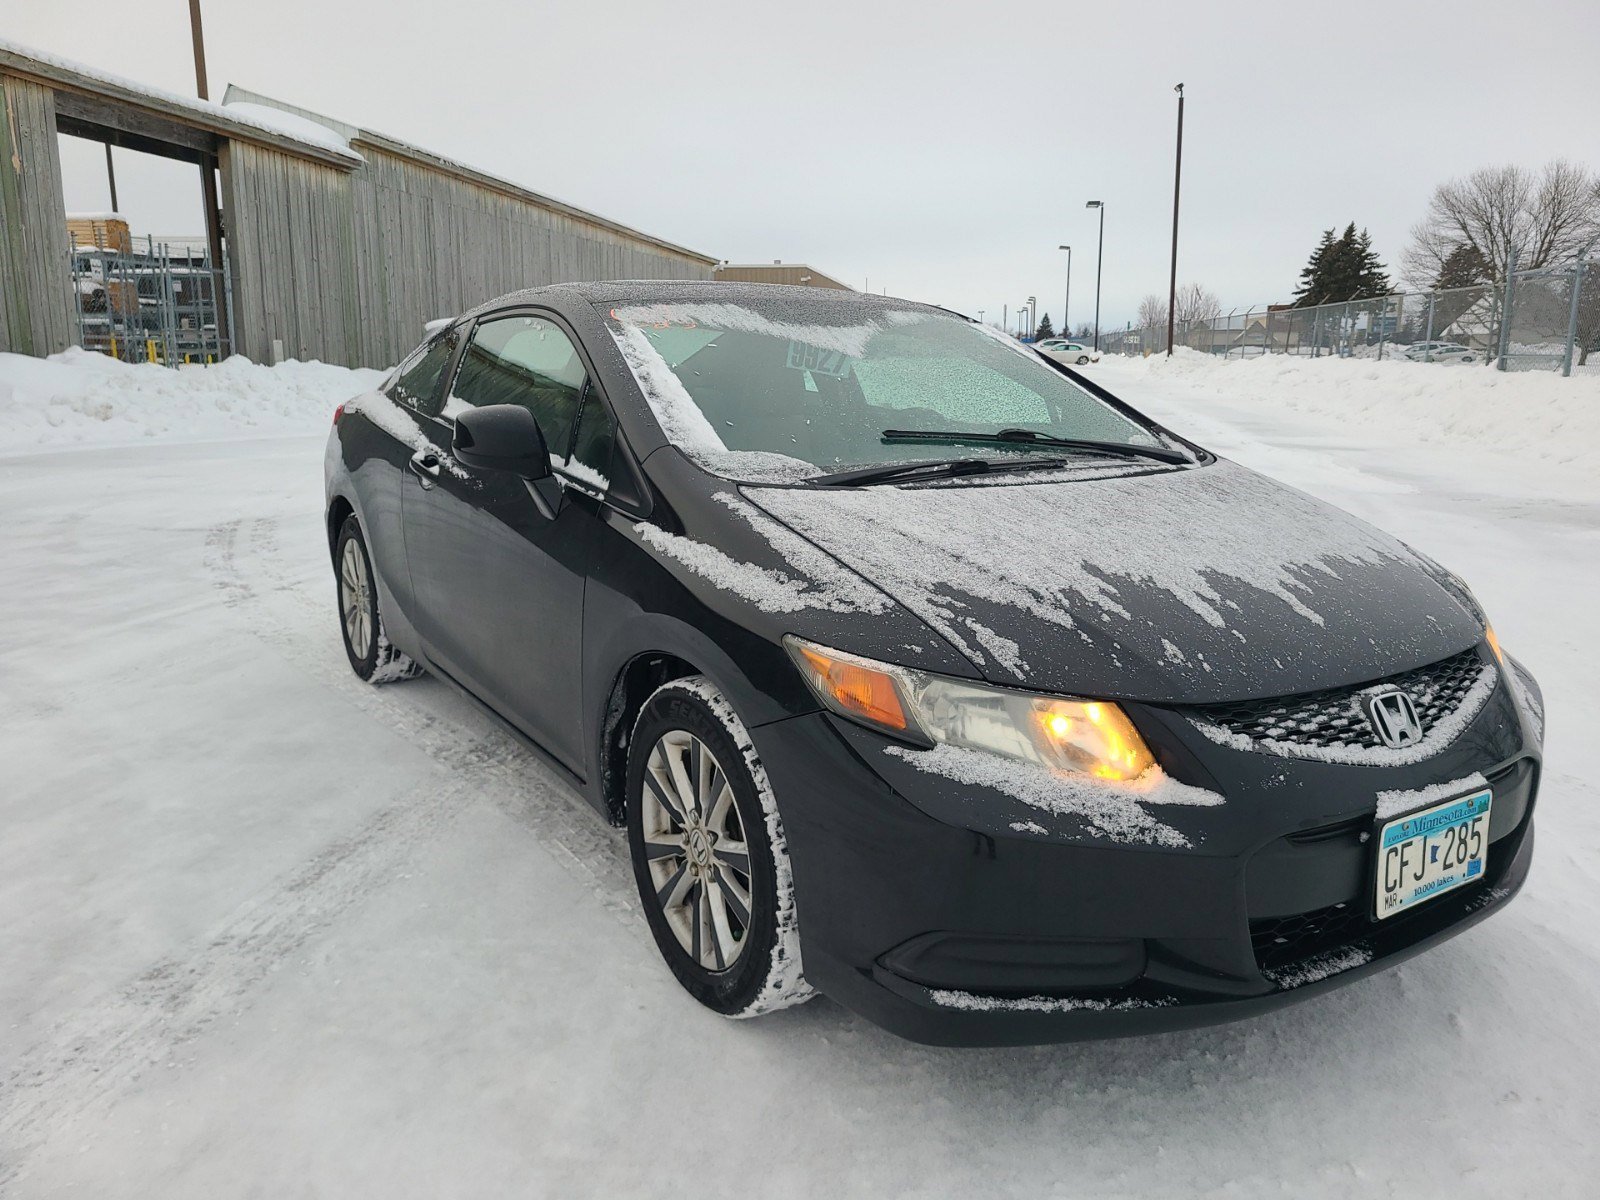 Used 2012 Honda Civic EX with VIN 2HGFG3B87CH530316 for sale in Baxter, Minnesota